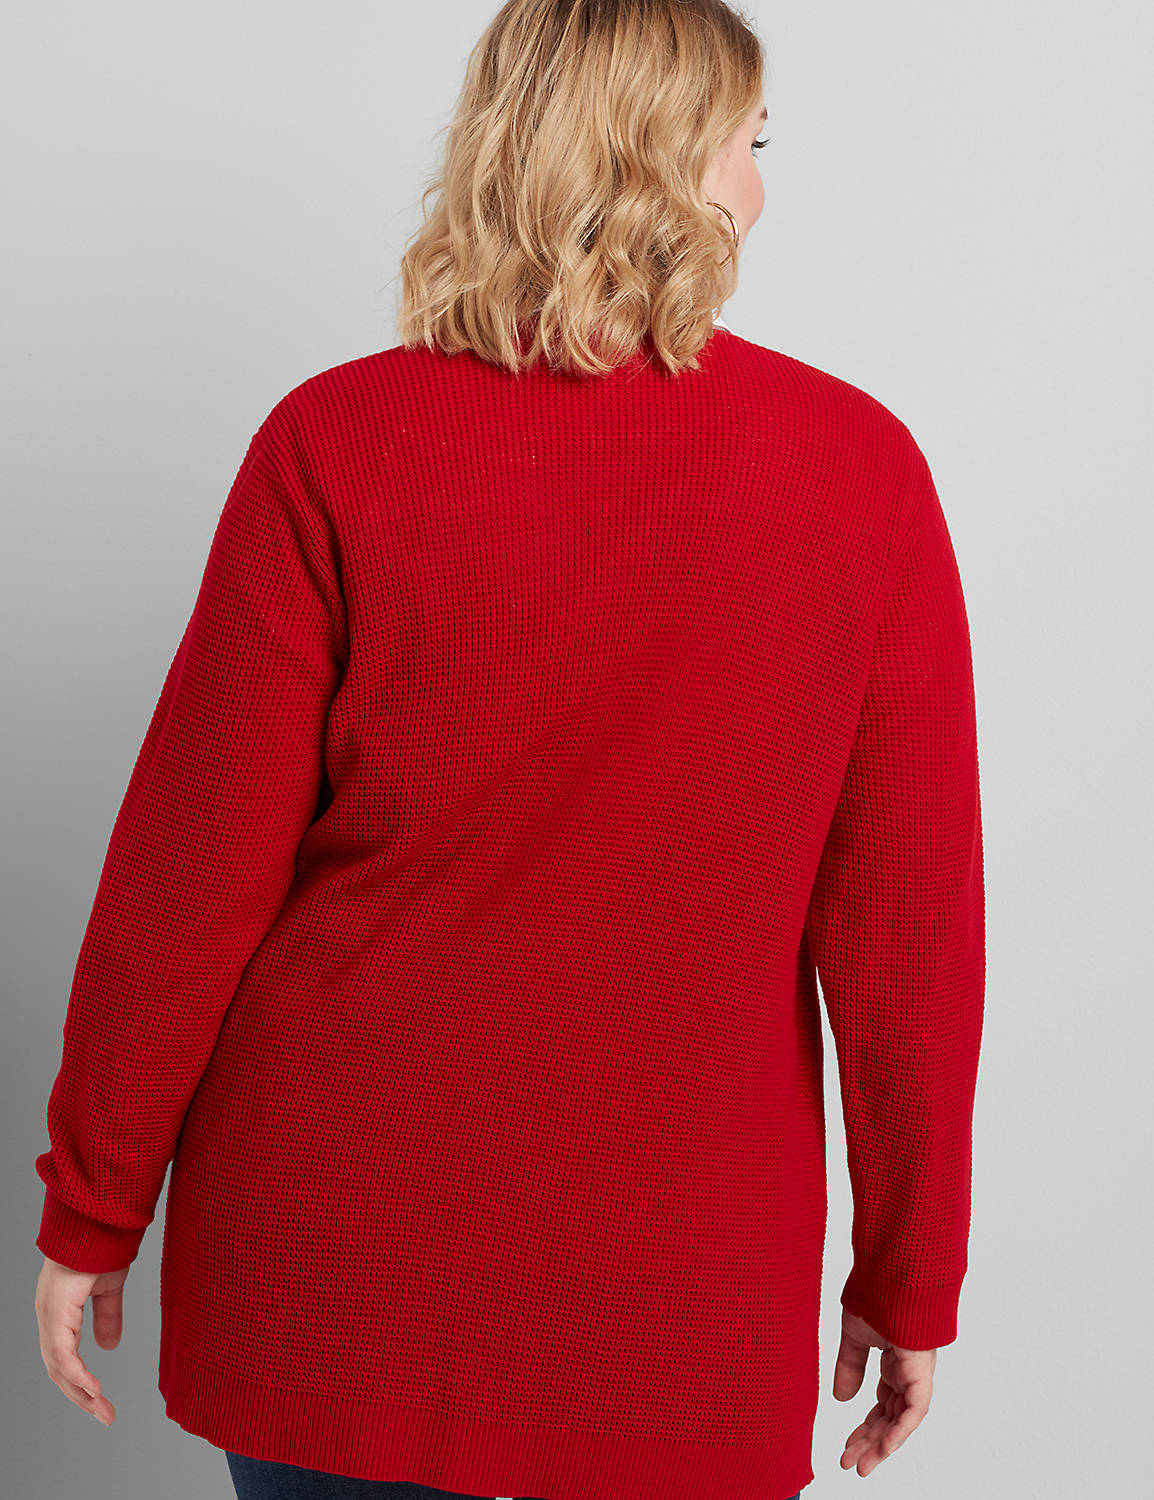 LONG SLEEVE OPEN FRONT PATCH POCKET WAFFLE STITCH CARDIGAN 1113637:PANTONE Haute Red:10/12 Product Image 2